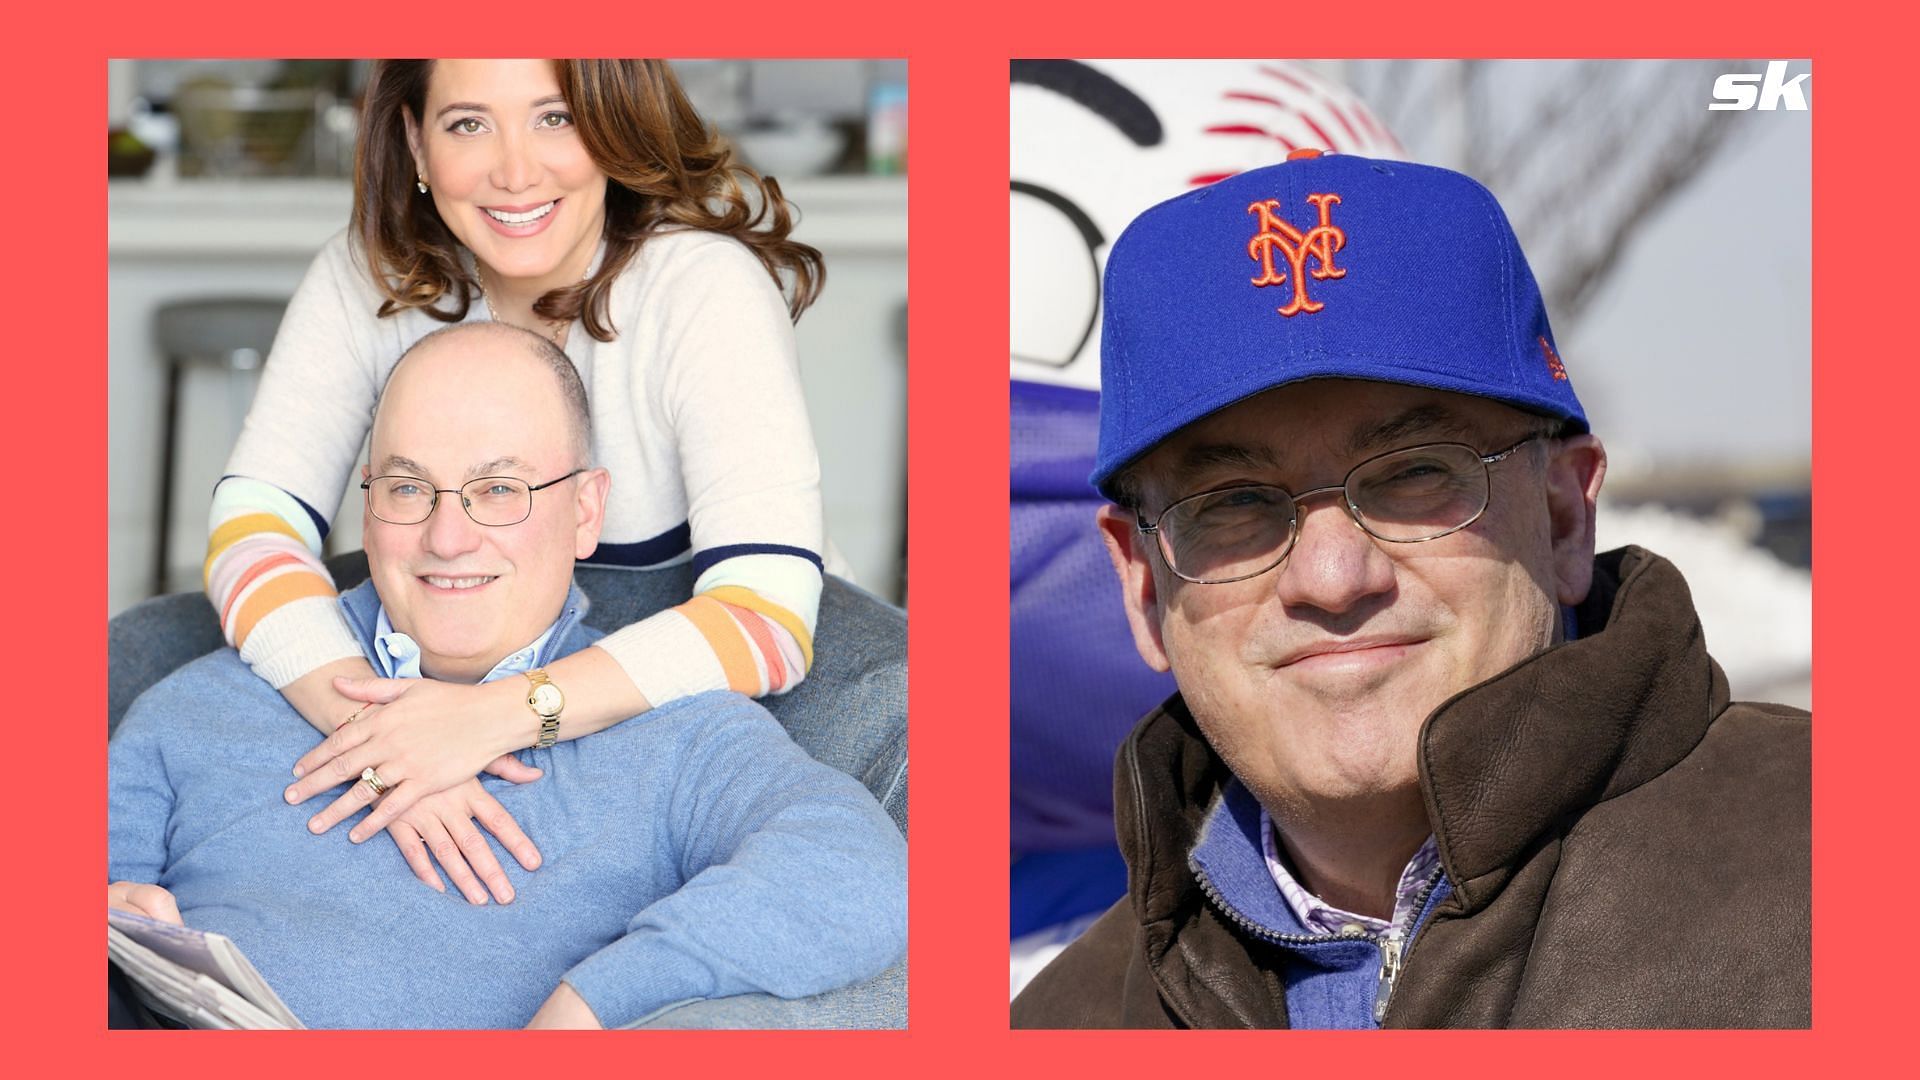 Steve Cohen and wife Alexandra Cohen contributed $5 million towards MDMA research